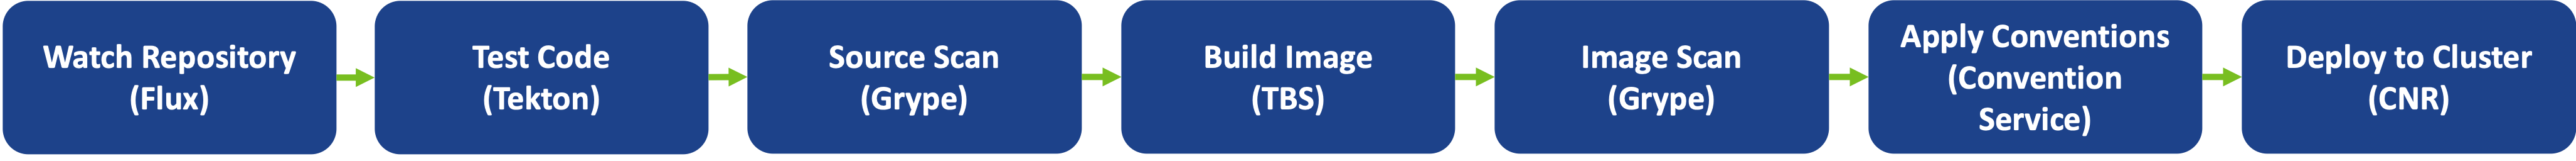 The Source-and-Test-to-URL chain: Watch Repo (Flux) to Test Code (Tekton) to Build Image (TBS) to Apply Conventions to Deploy to Cluster (CNRs).